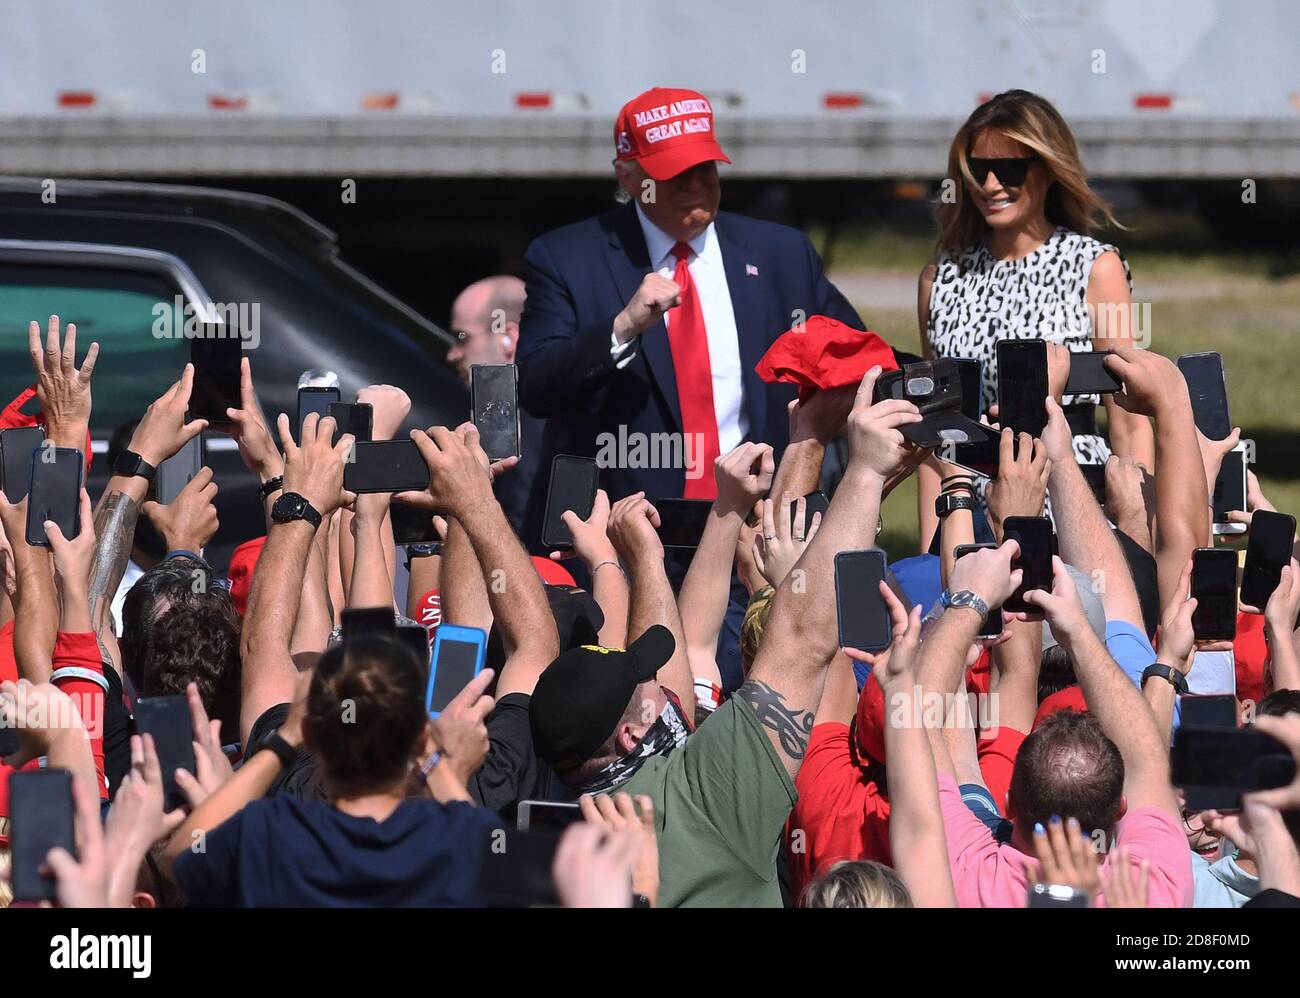 October 29, 2020 - Tampa, Florida, United States - U.S. President Donald Trump and First Lady Melania arrive for a campaign rally outside Raymond James Stadium on October 29, 2020 in Tampa, Florida. With 5 days until the November 3 election, Trump continues to campaign in swing states against Democratic presidential nominee Joe Biden. (Paul Hennessy/Alamy) Credit: Paul Hennessy/Alamy Live News Stock Photo